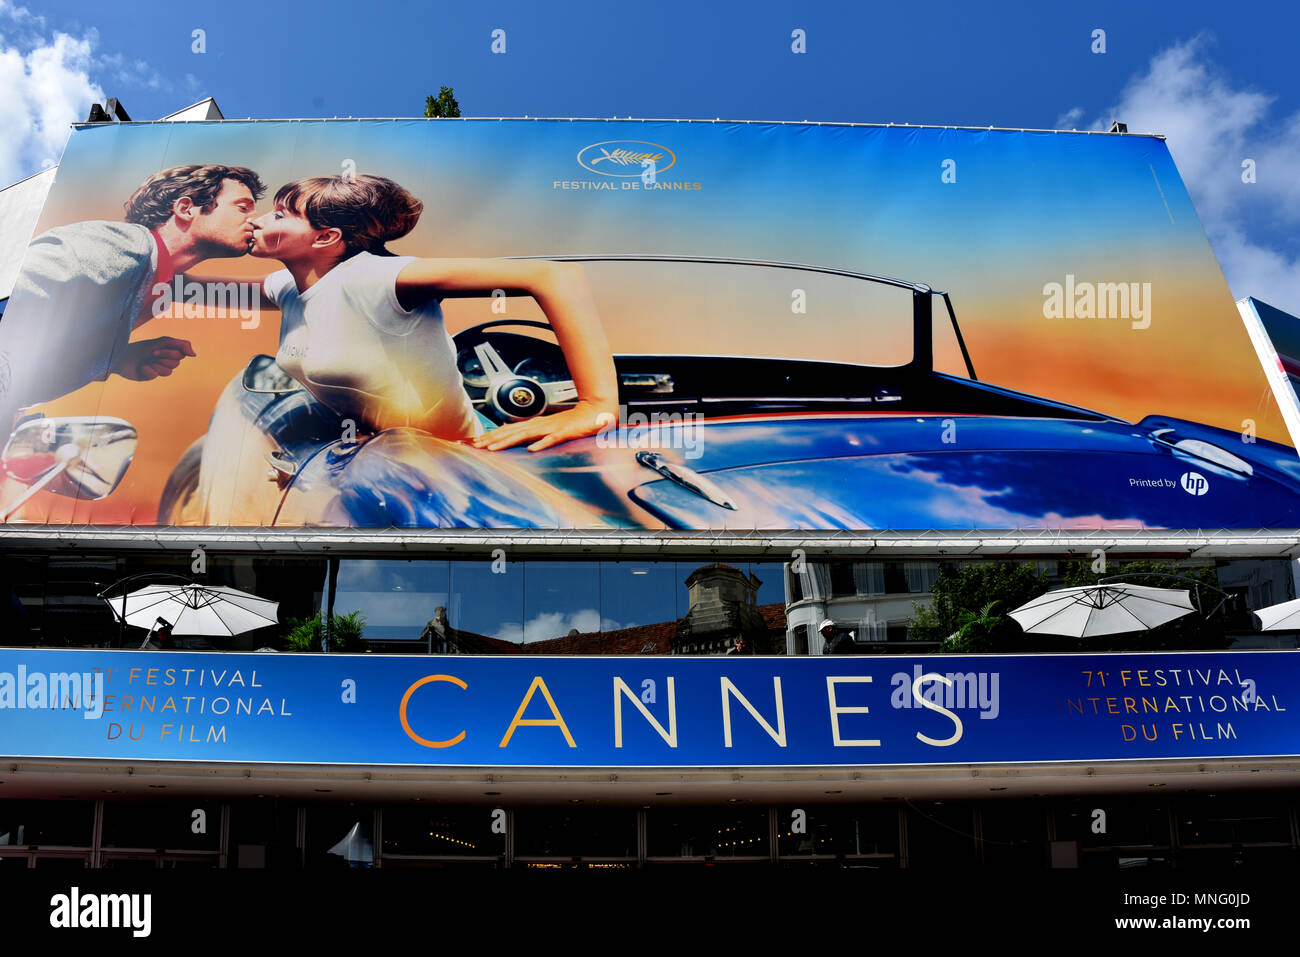 Cannes, France - May 11, 2018:  The poster for the 71st Cannes Film Festival features a scene from the movie Pierrot Le Fou, with Jean-Paul Belmondo a Stock Photo